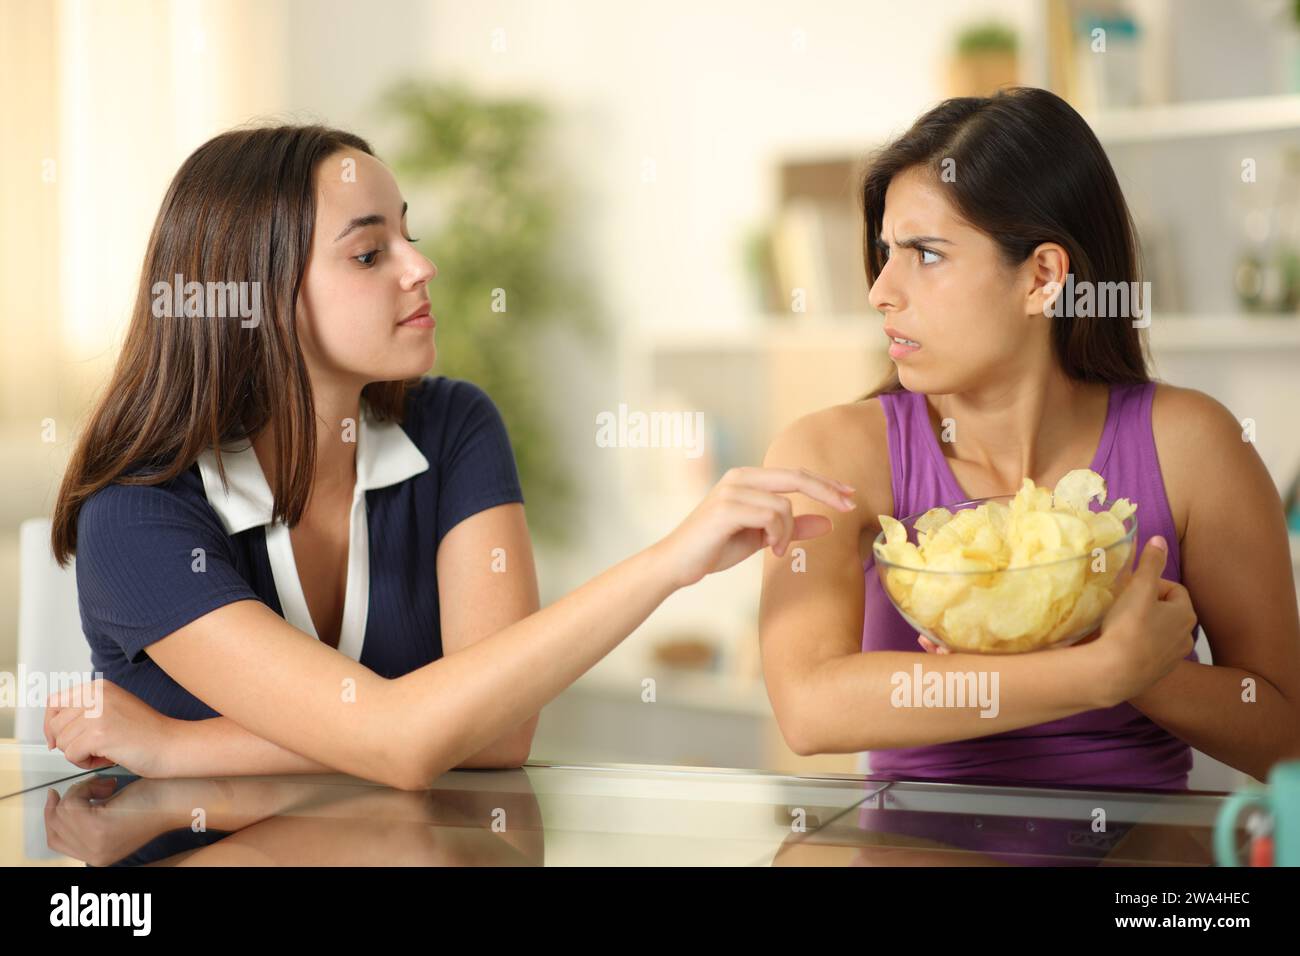 Selfish woman protecting her potato chips from friend at home Stock Photo